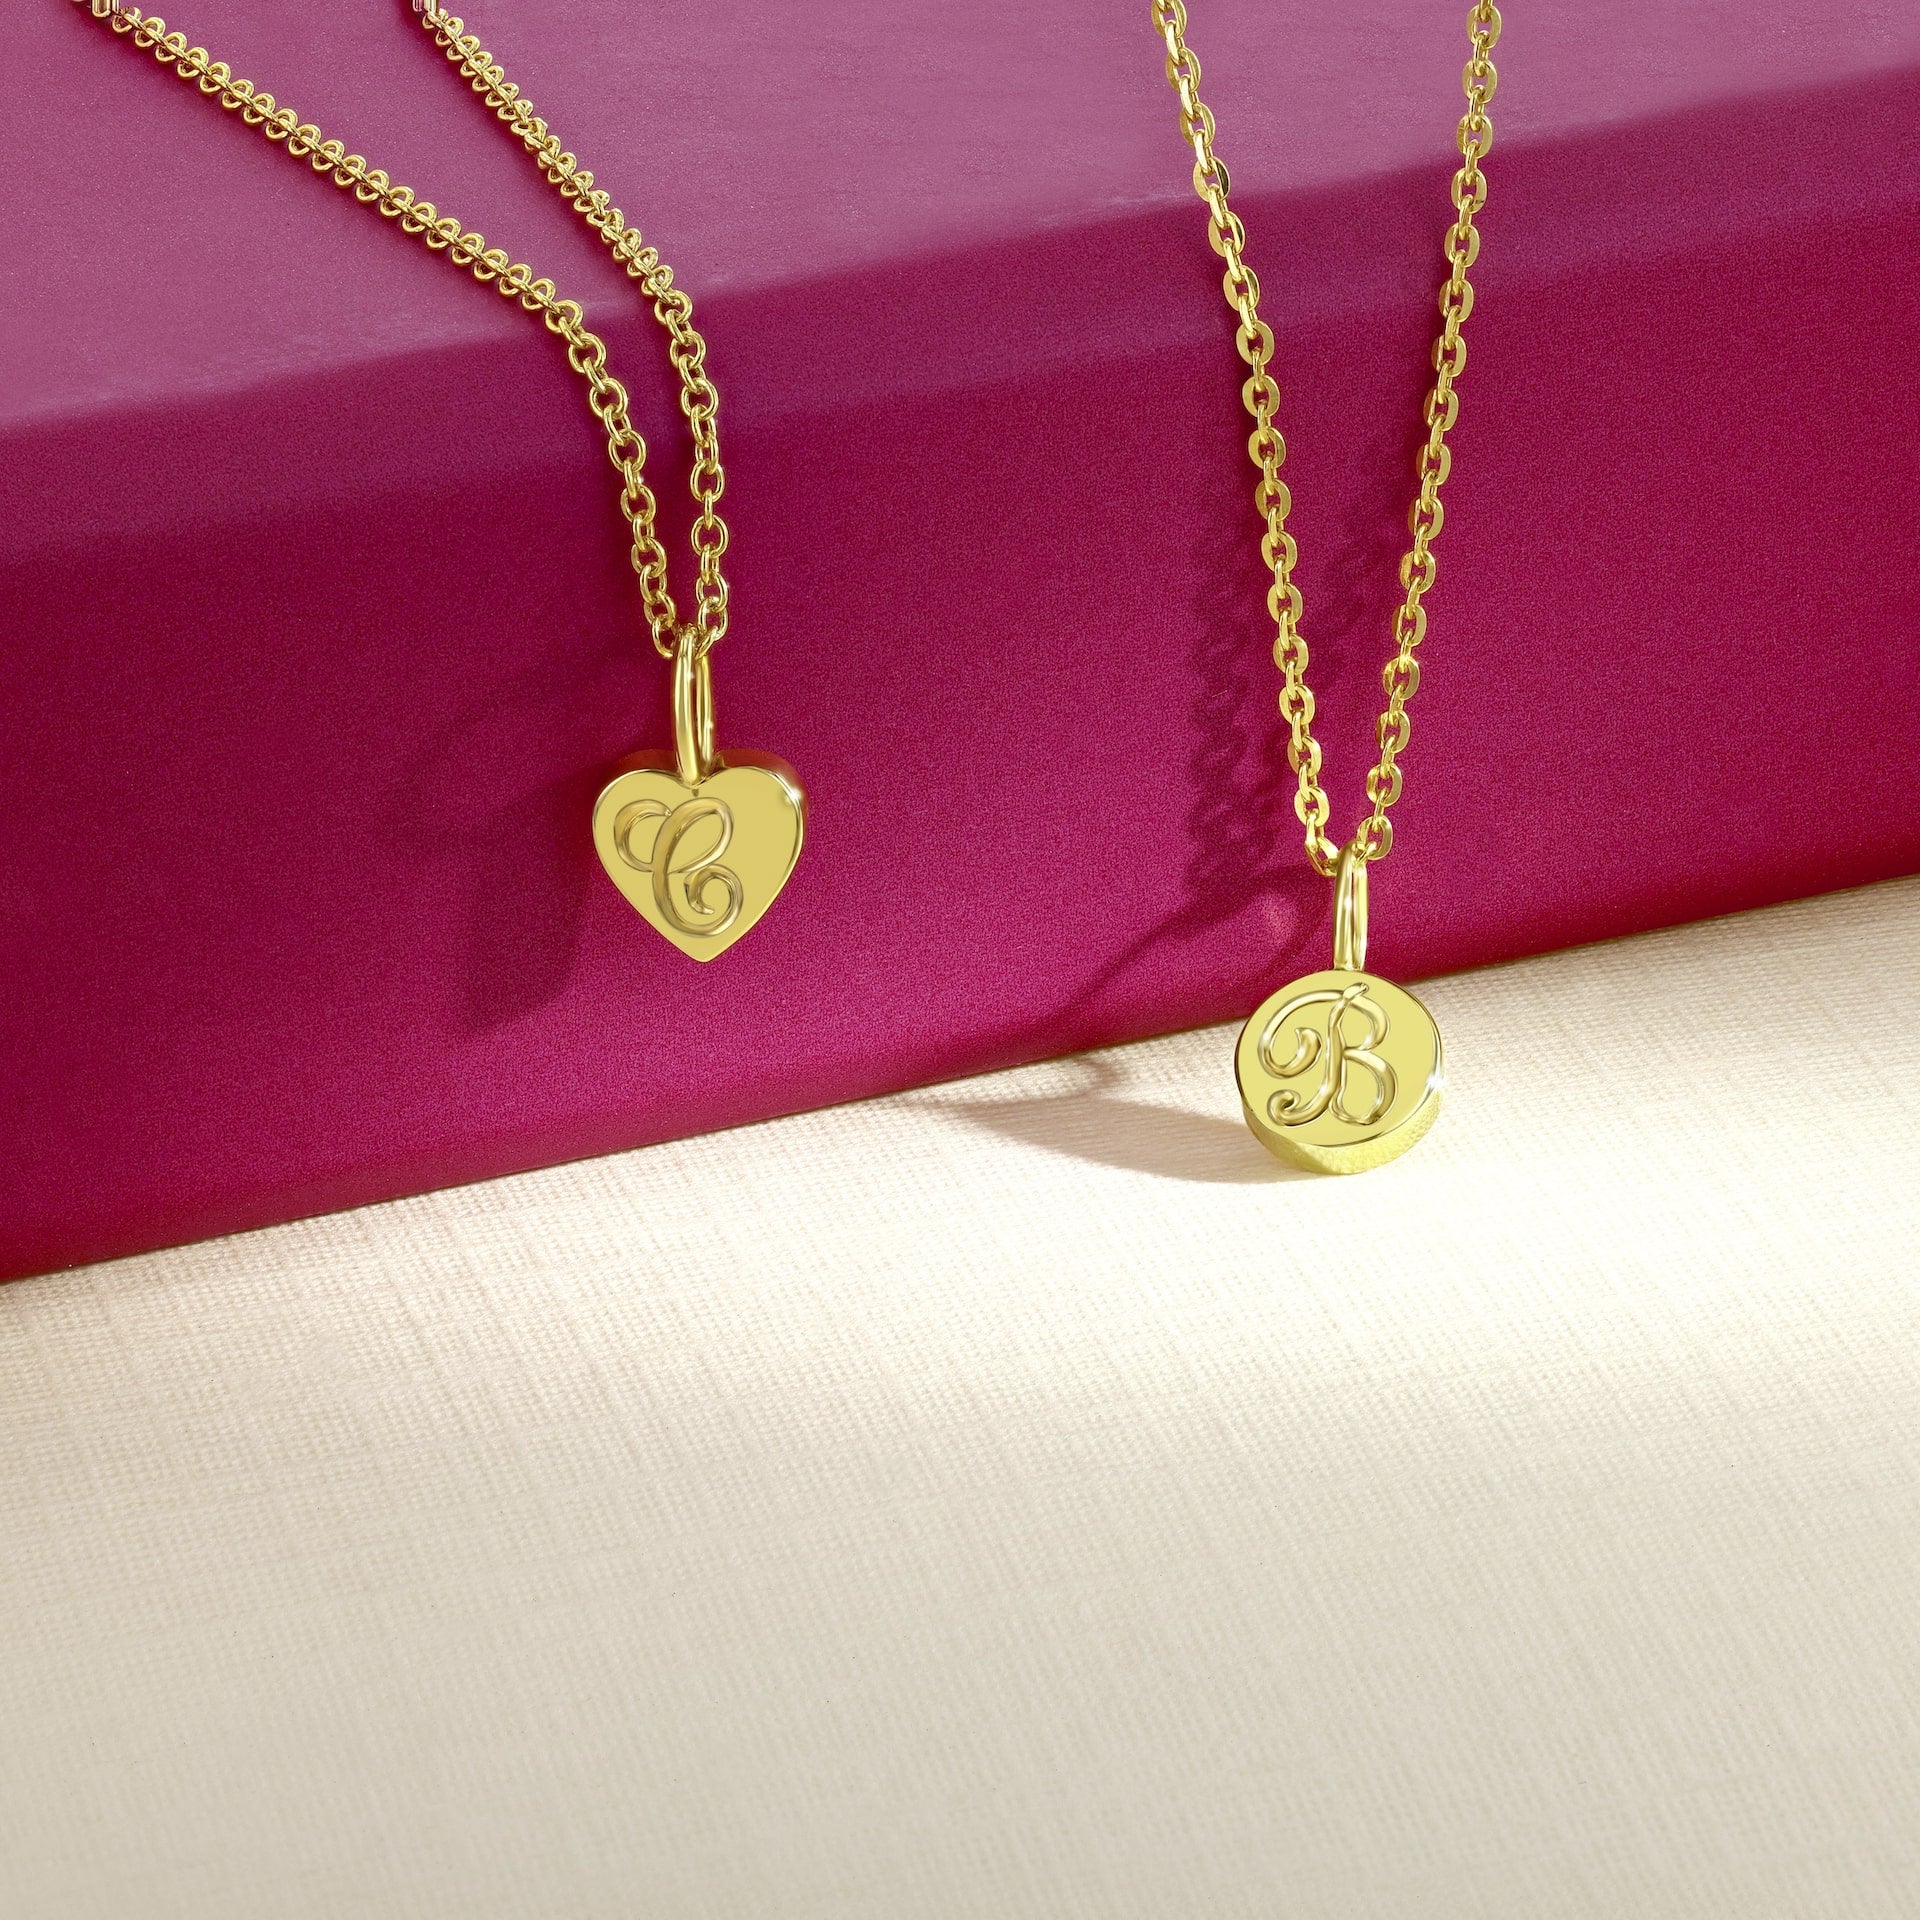 Shop the 14k Solid Gold Collection in Jewelry from Charm & Lace at charmnlace.com